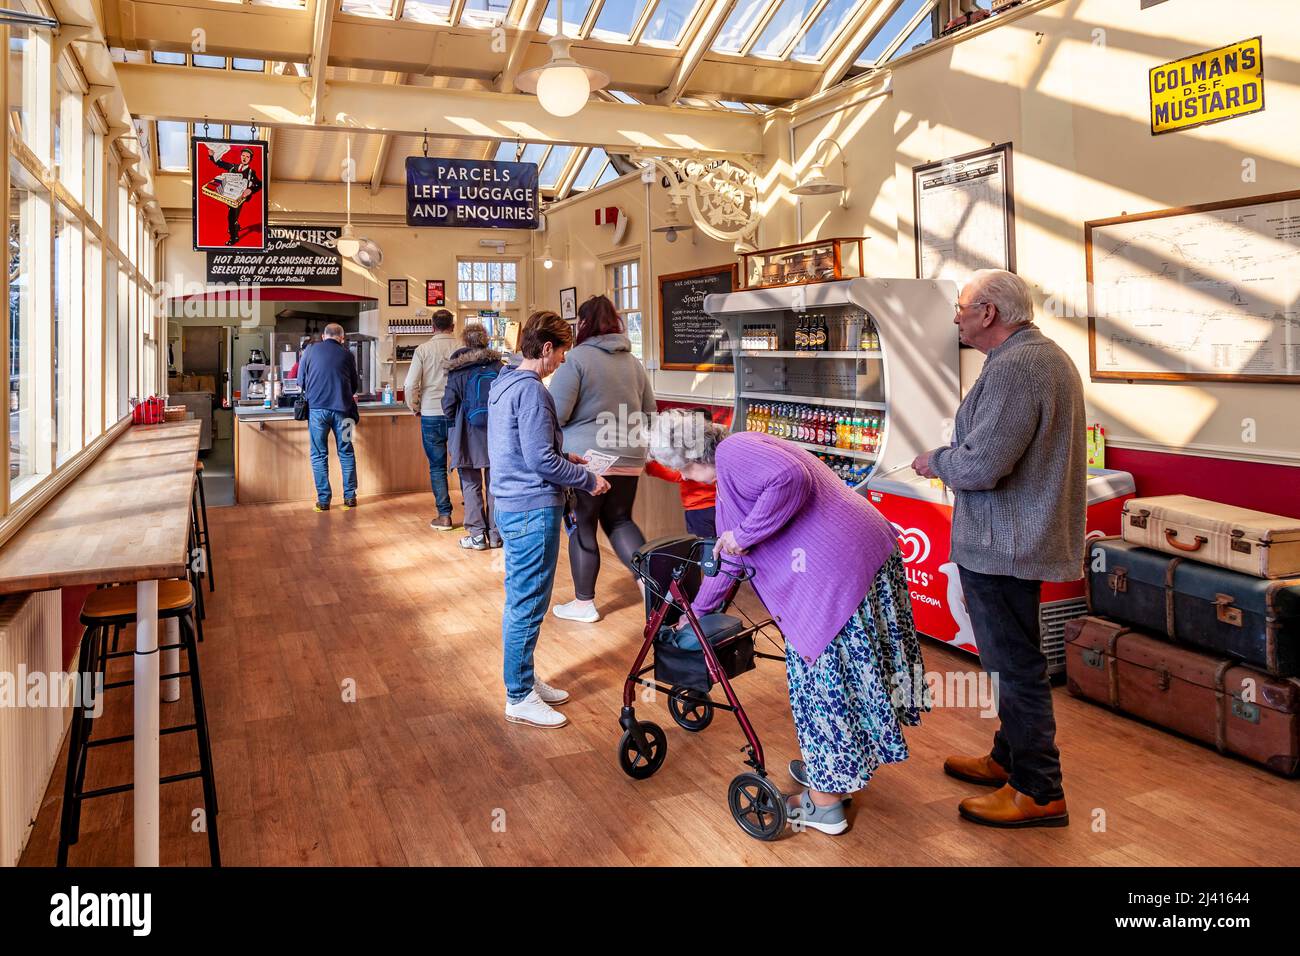 Sheringham station café, North Norfolk Railway – The Poppy Line, East Anglia, Angleterre, Royaume-Uni Banque D'Images